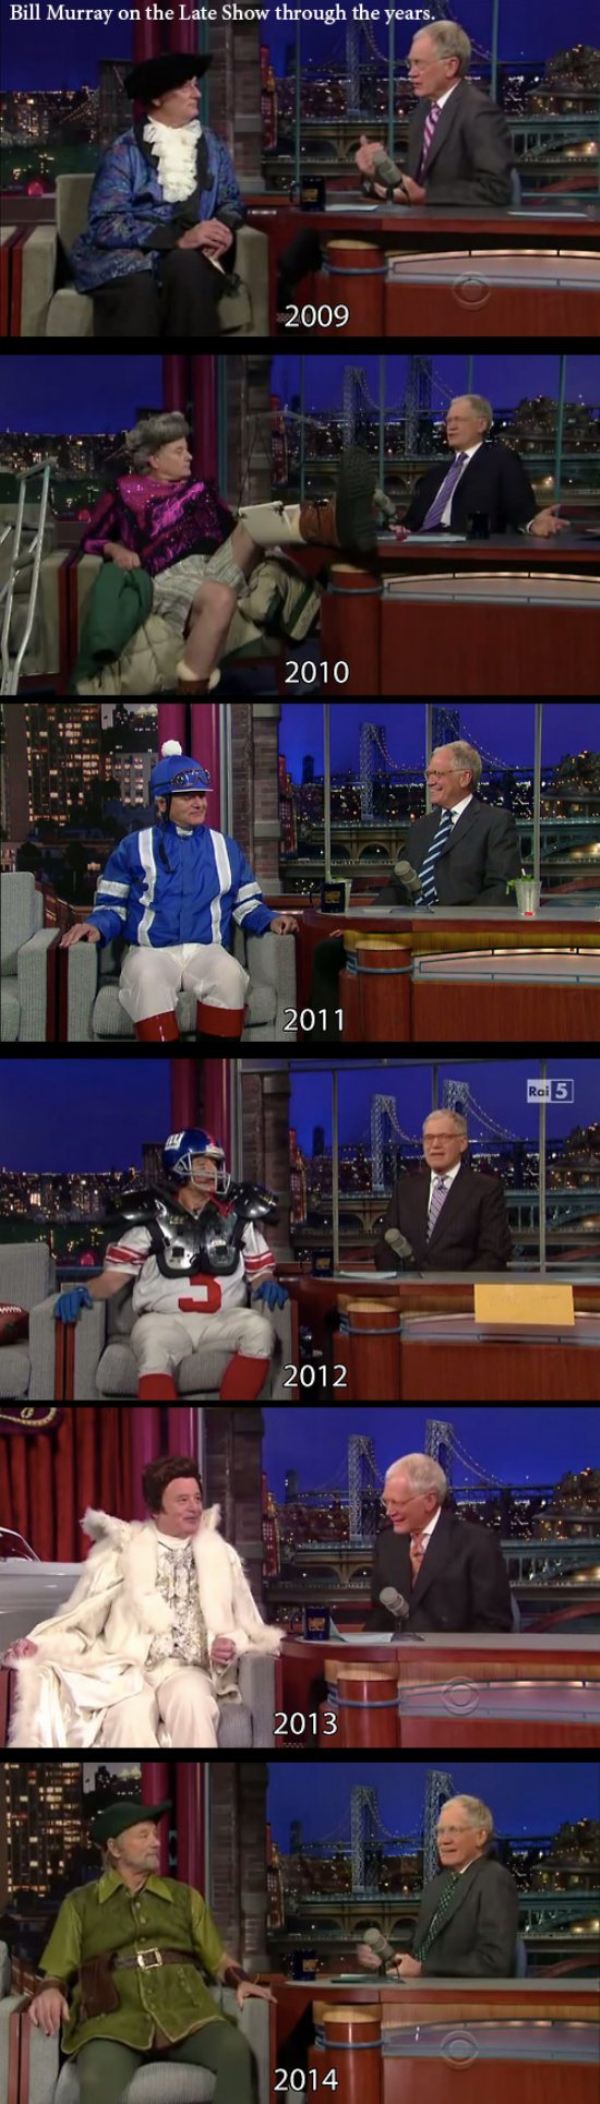 ghostbusters 3 - Bill Murray on the Late Show through the years. 2009 2010 2011 Rai 5 2012 2013 2014